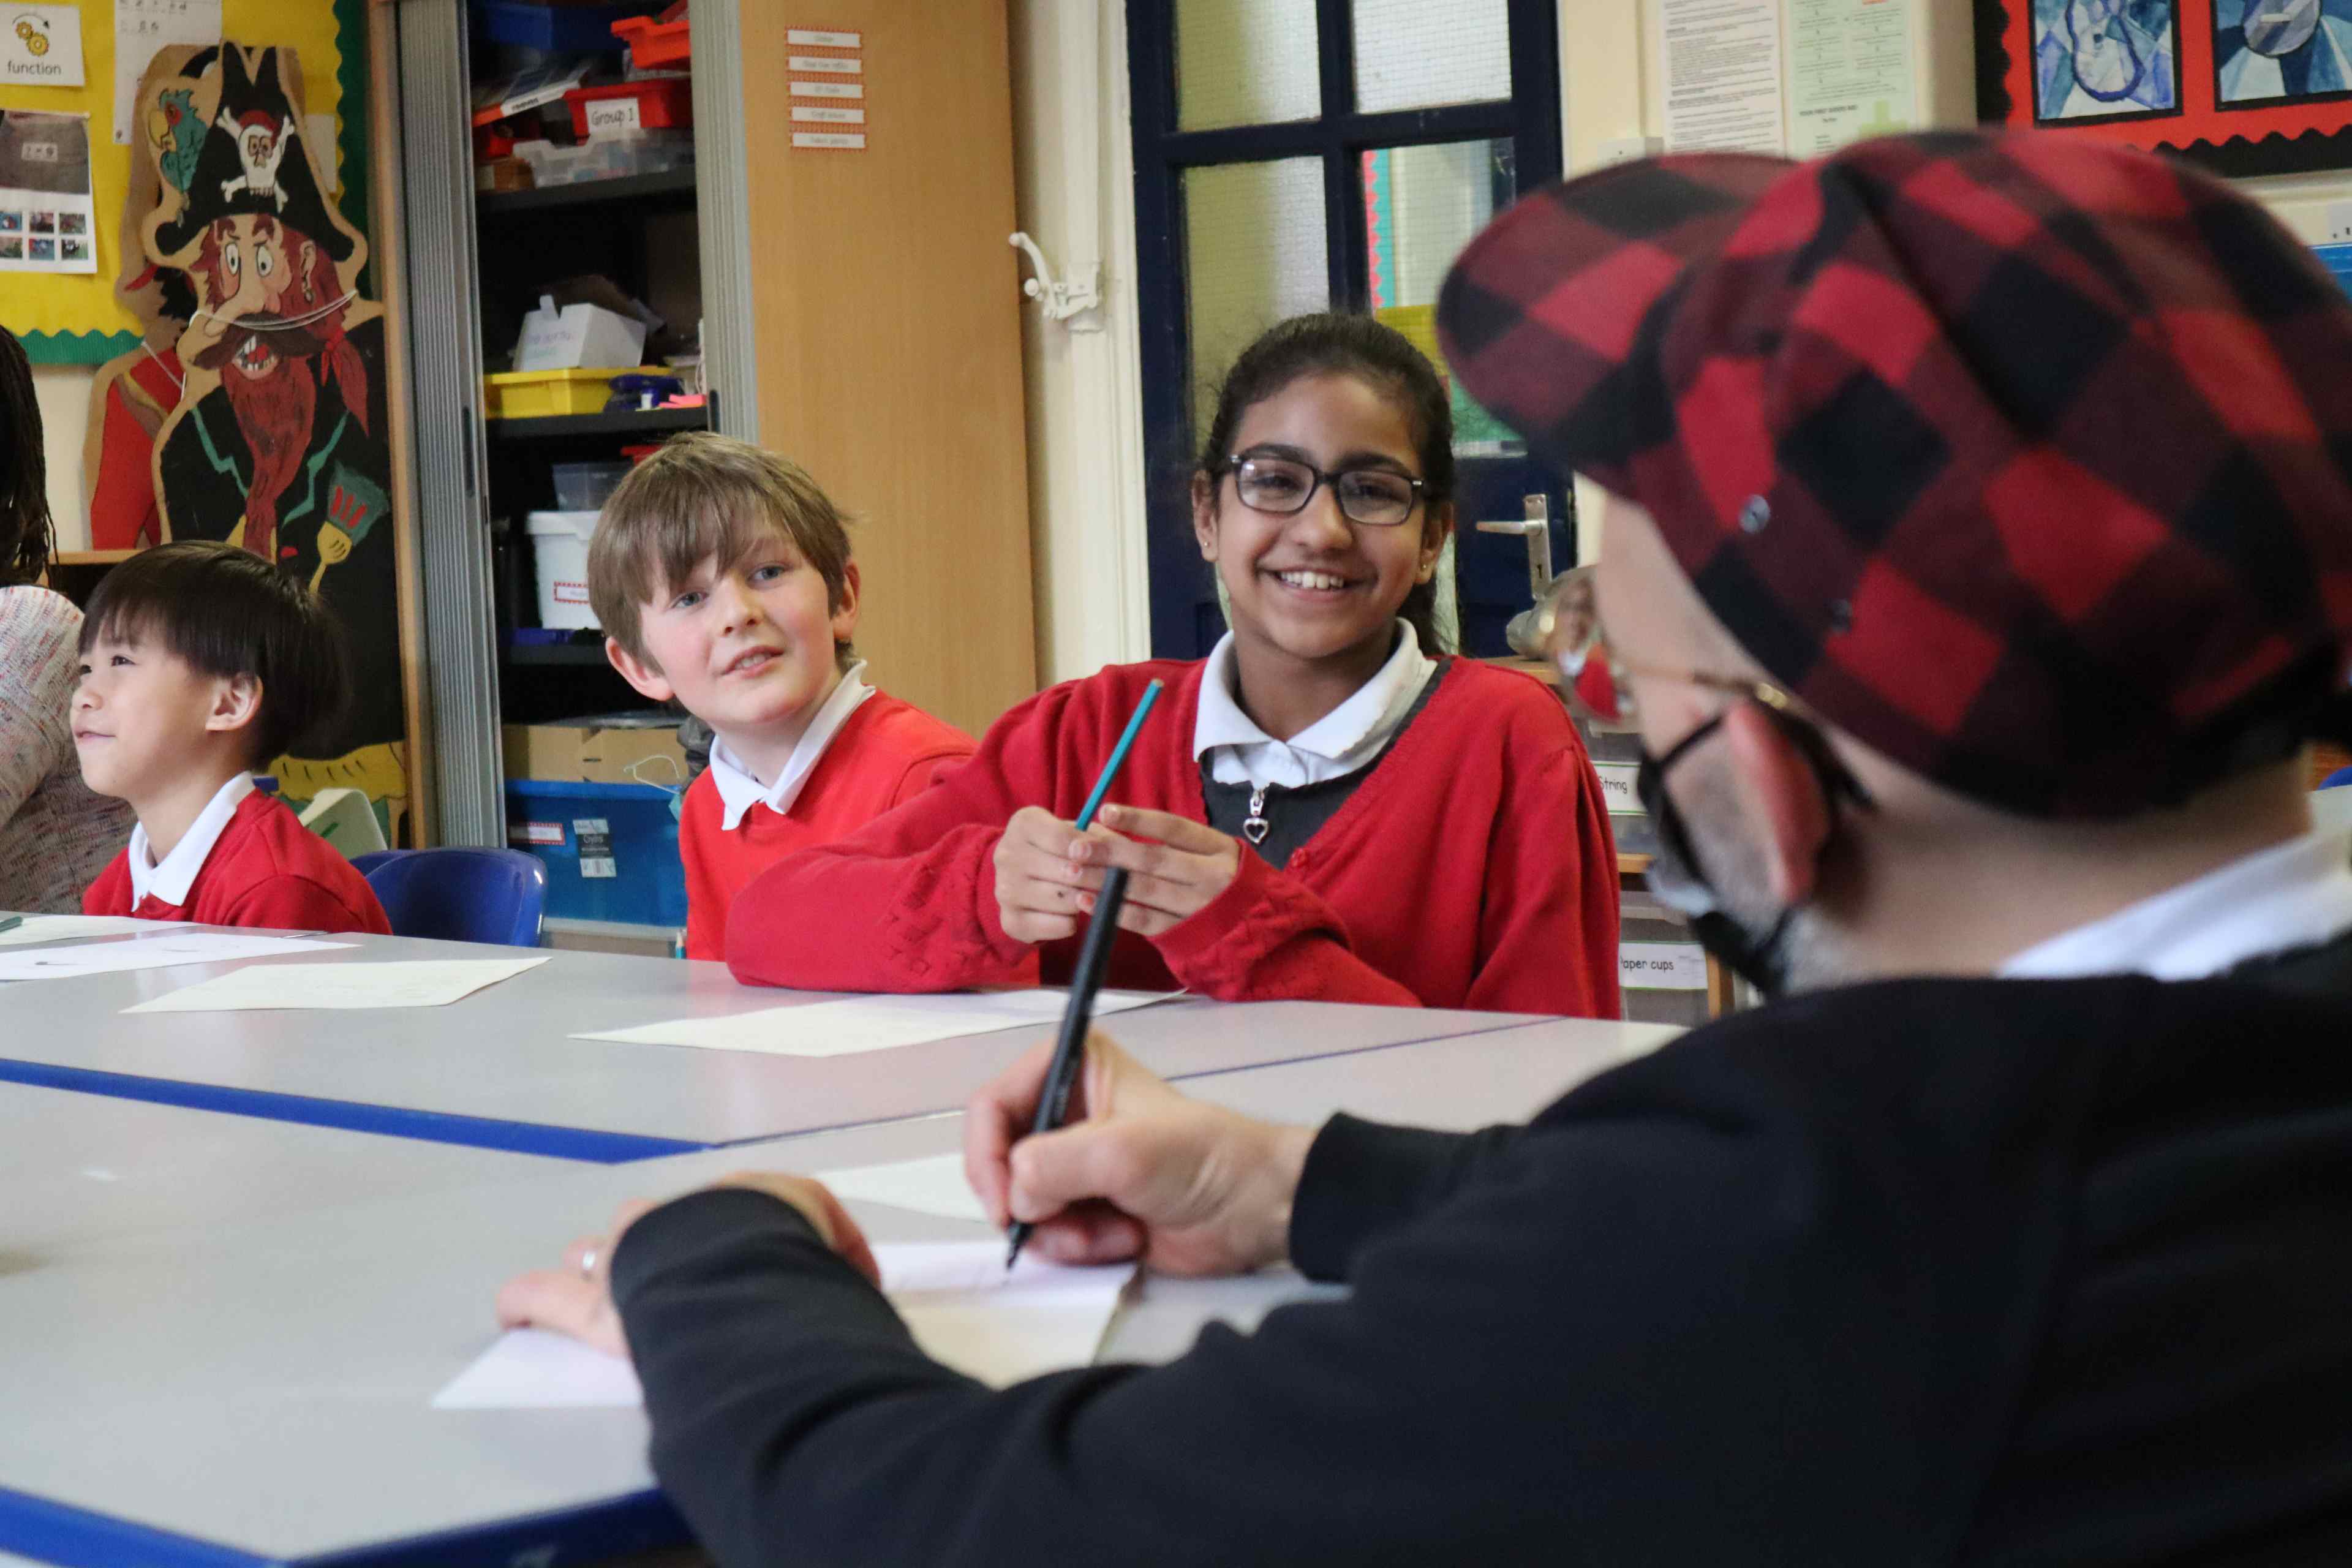 Three children wearing a red school uniform laughing with Ryan Gander at a table. Ryan Gander is facing away from the camera and is wearing a red and black tartan cap.